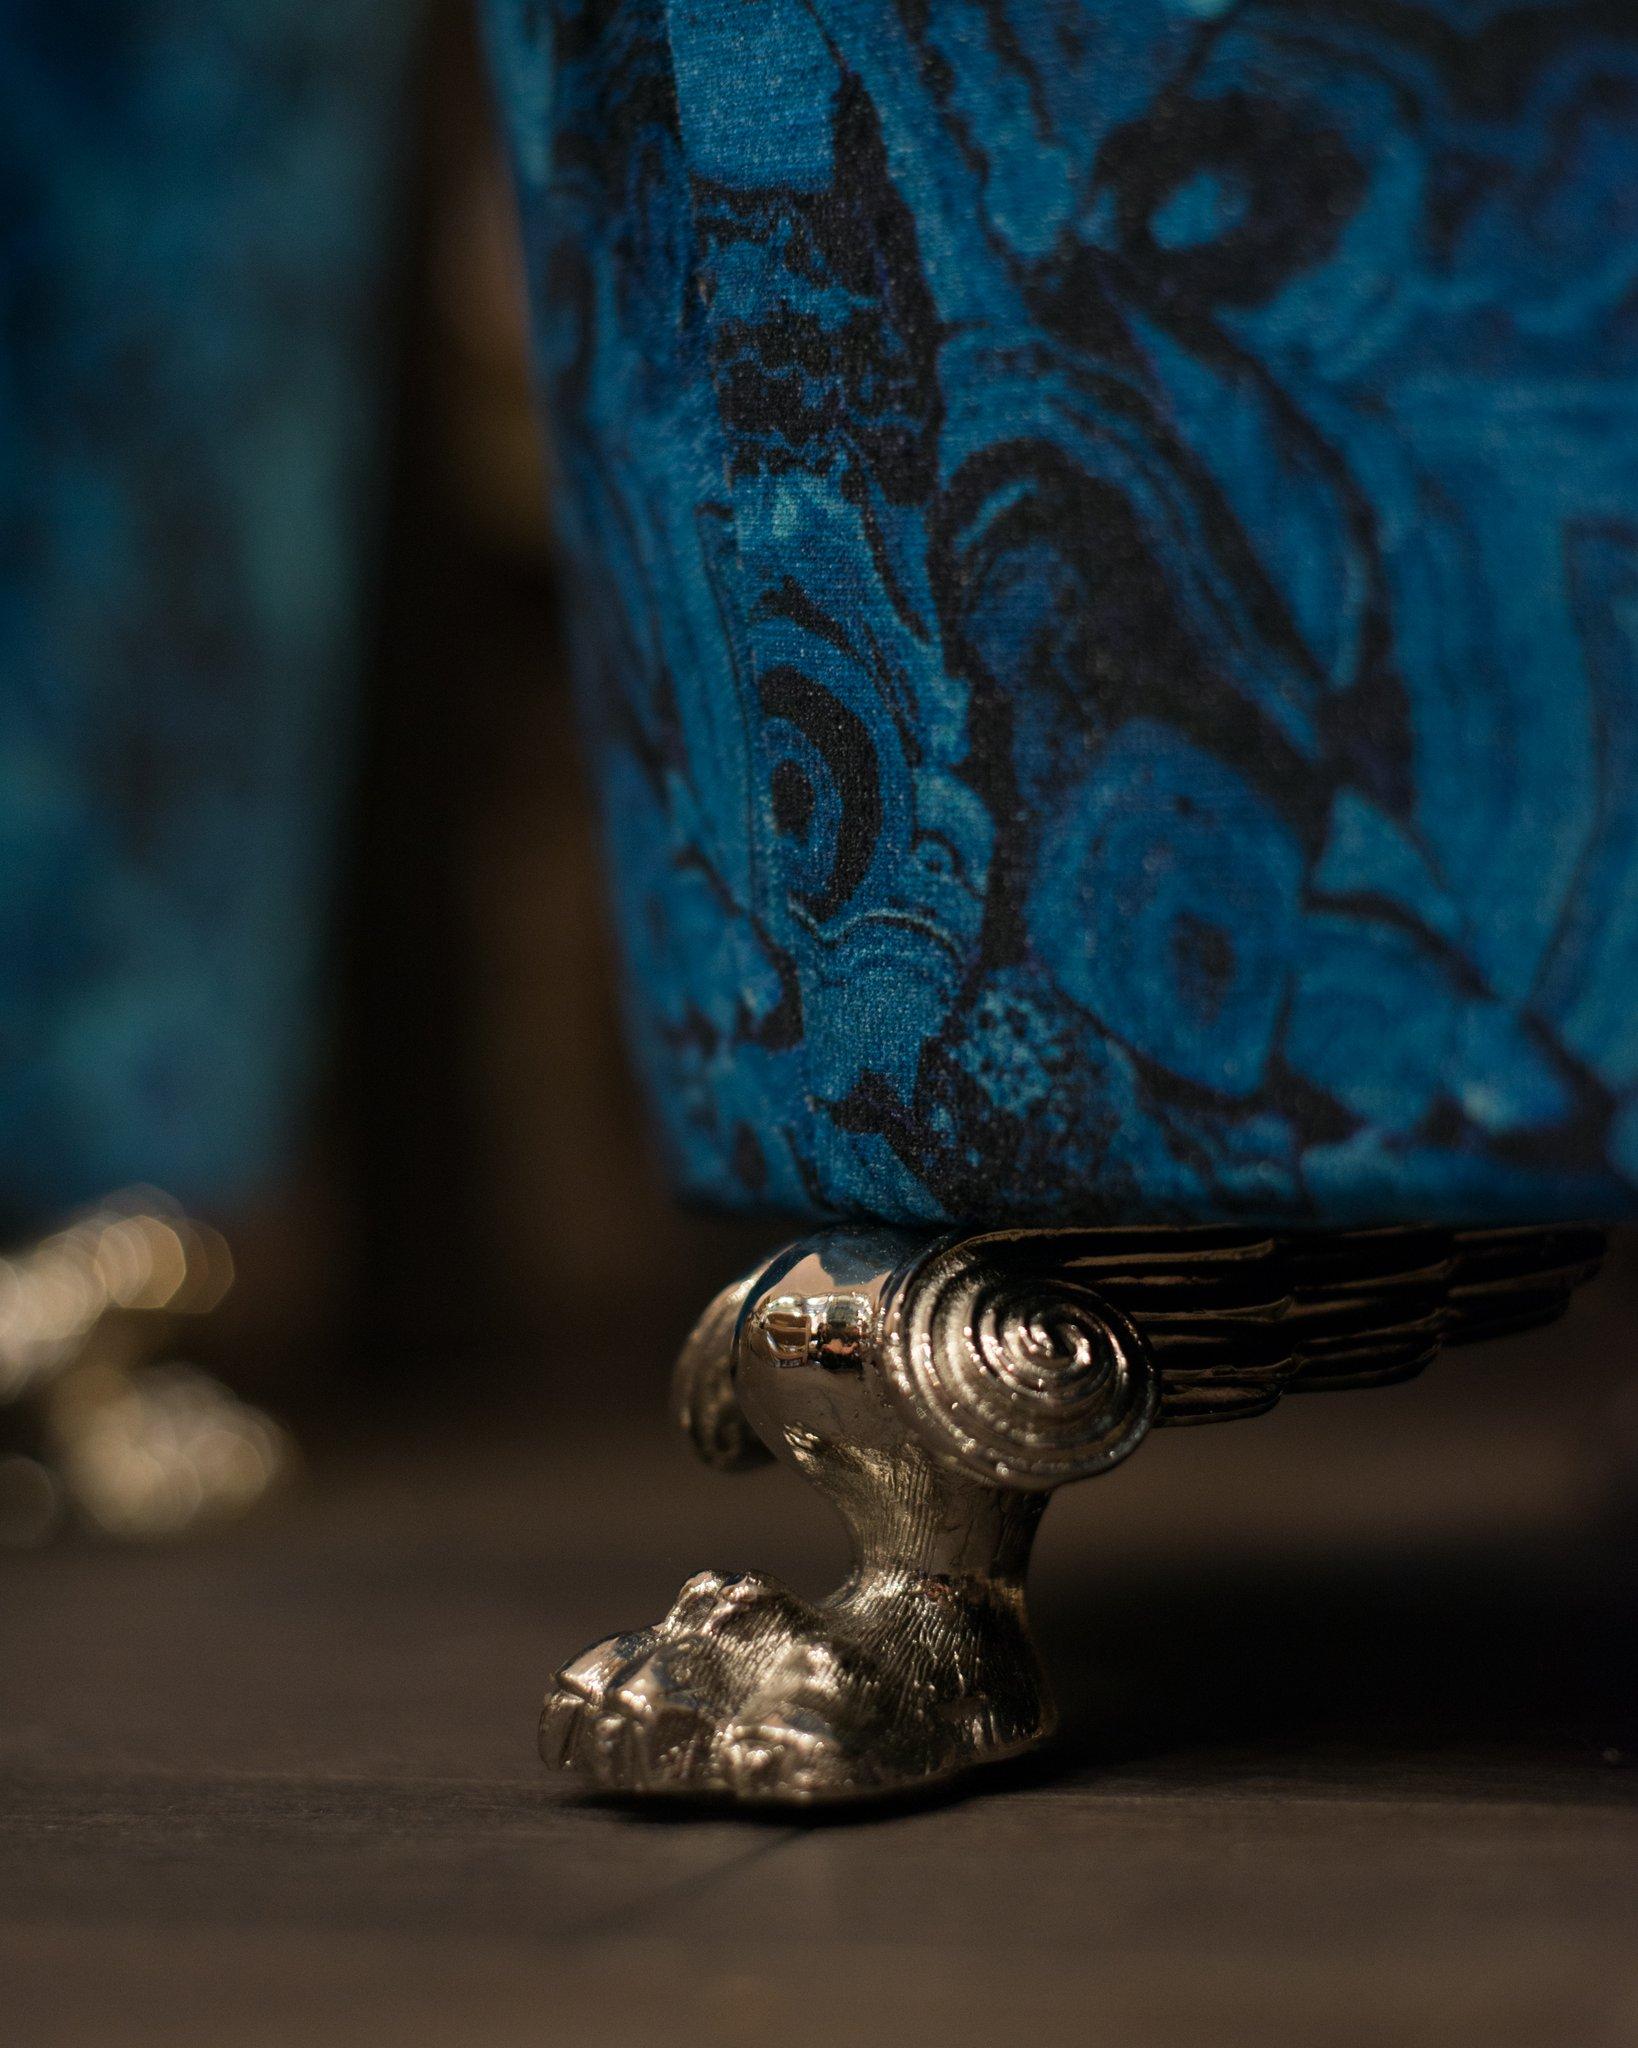 Canadian Pair of Studio Maison Nurita Blue Agate Tables with Nickel Lion's Feet Legs For Sale